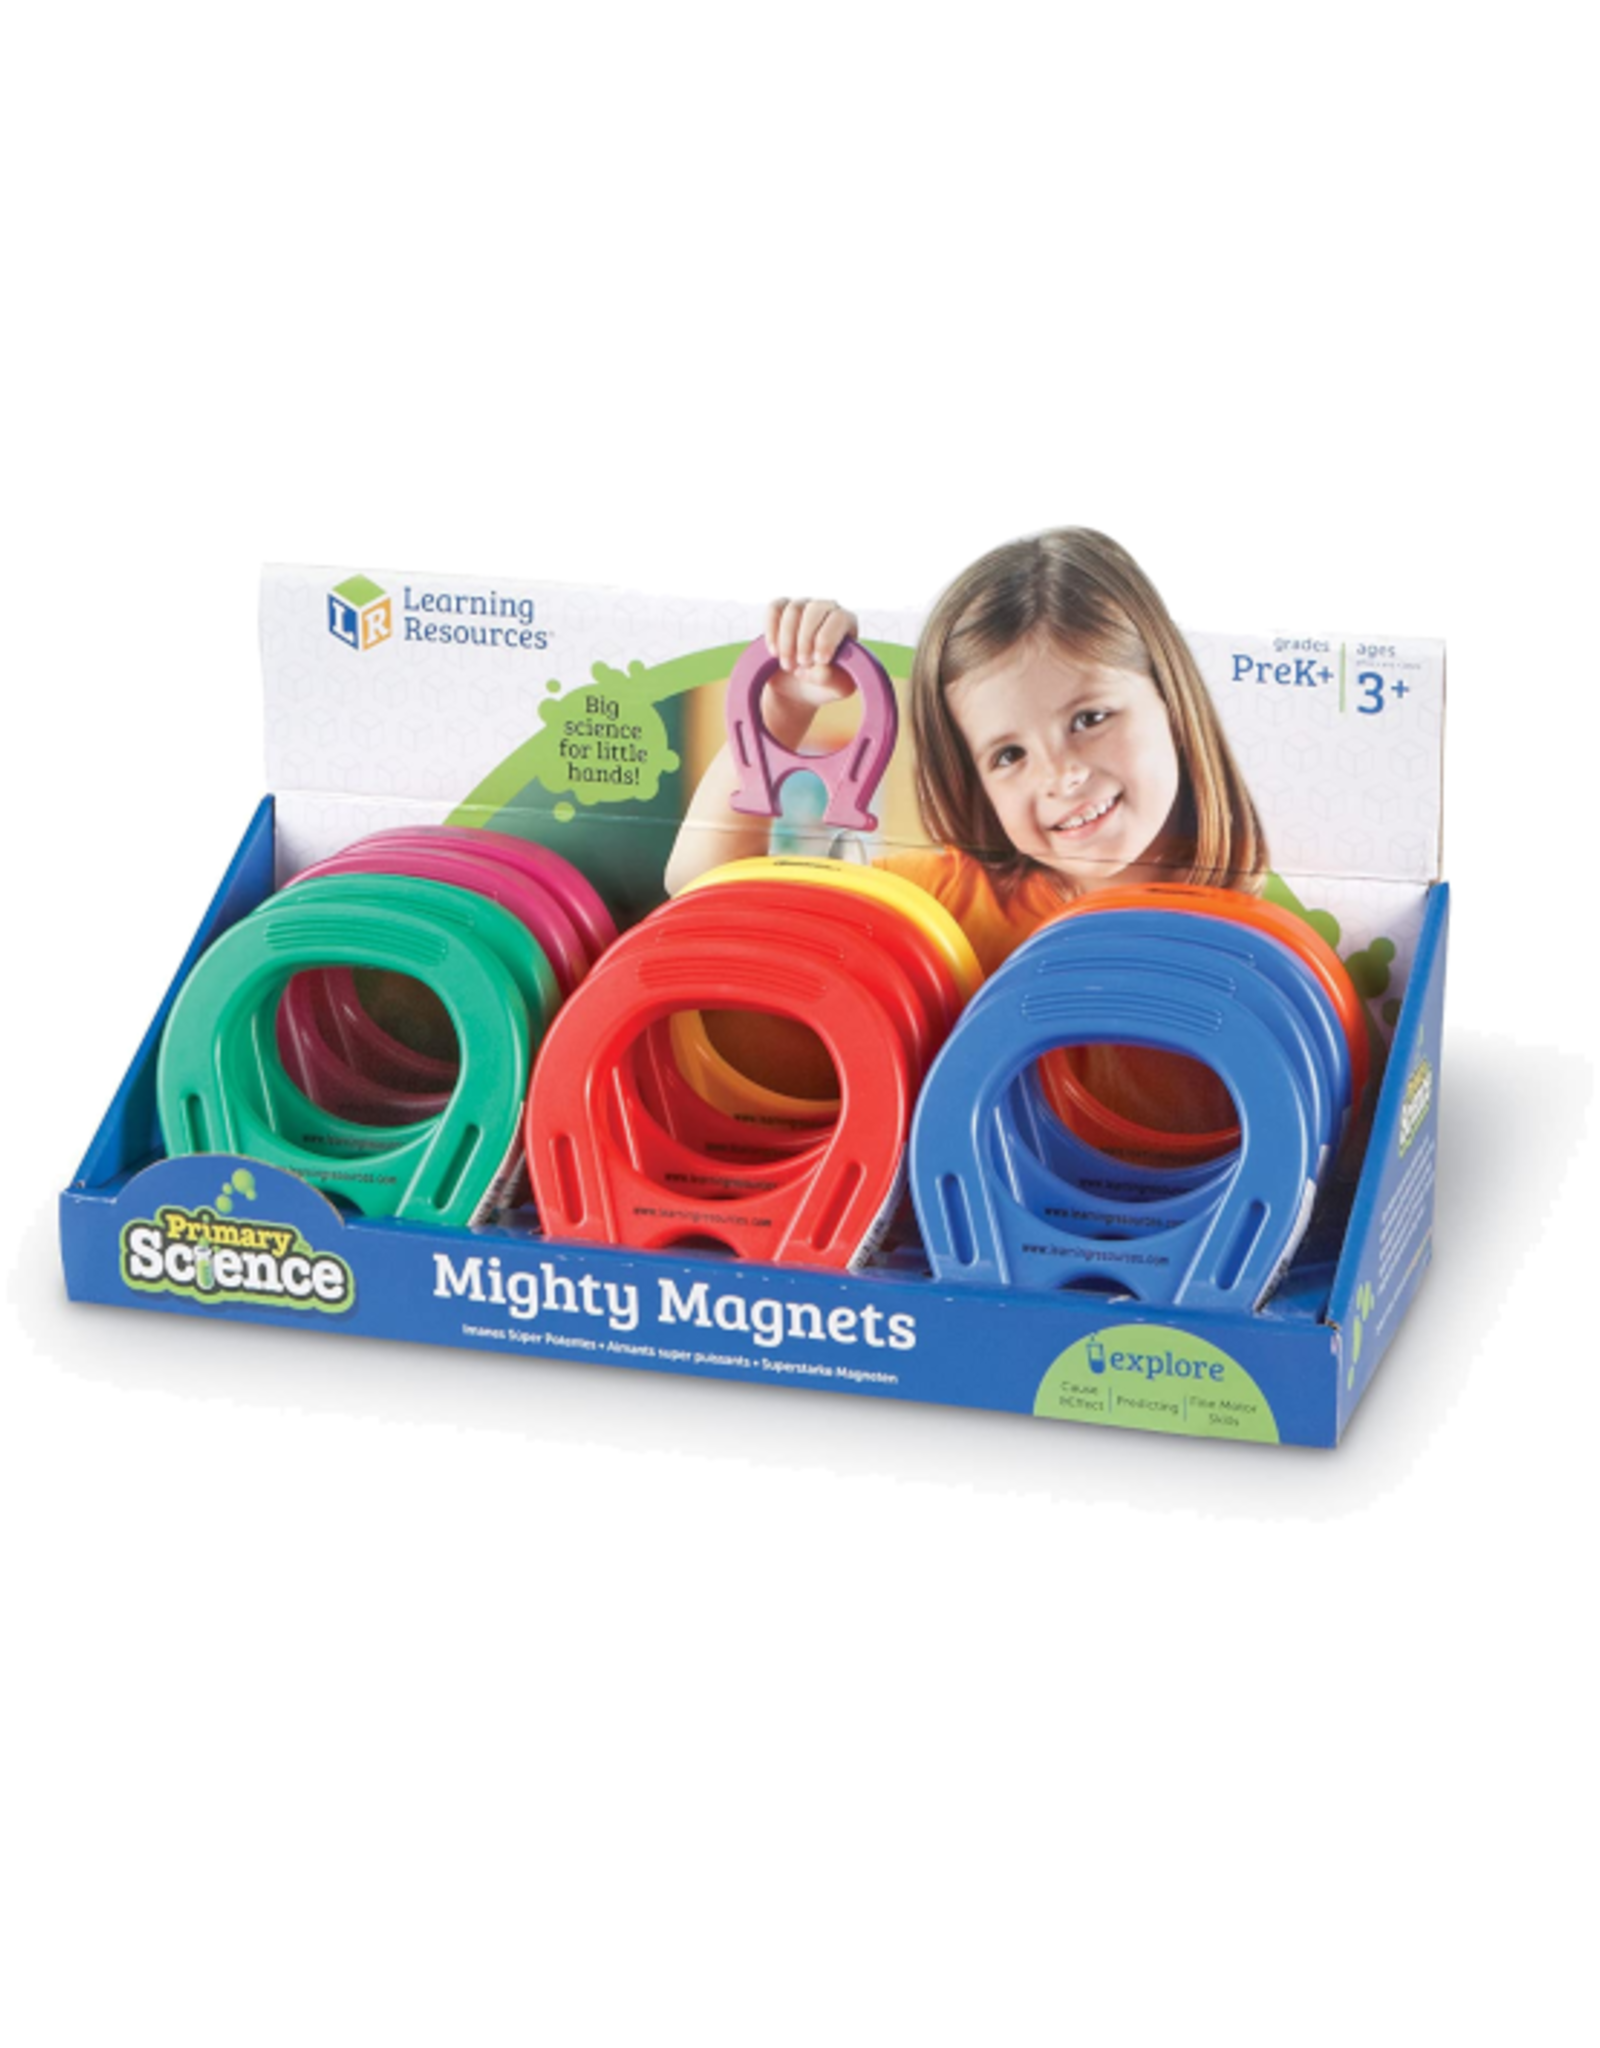 Learning Resources - Mighty Magnets